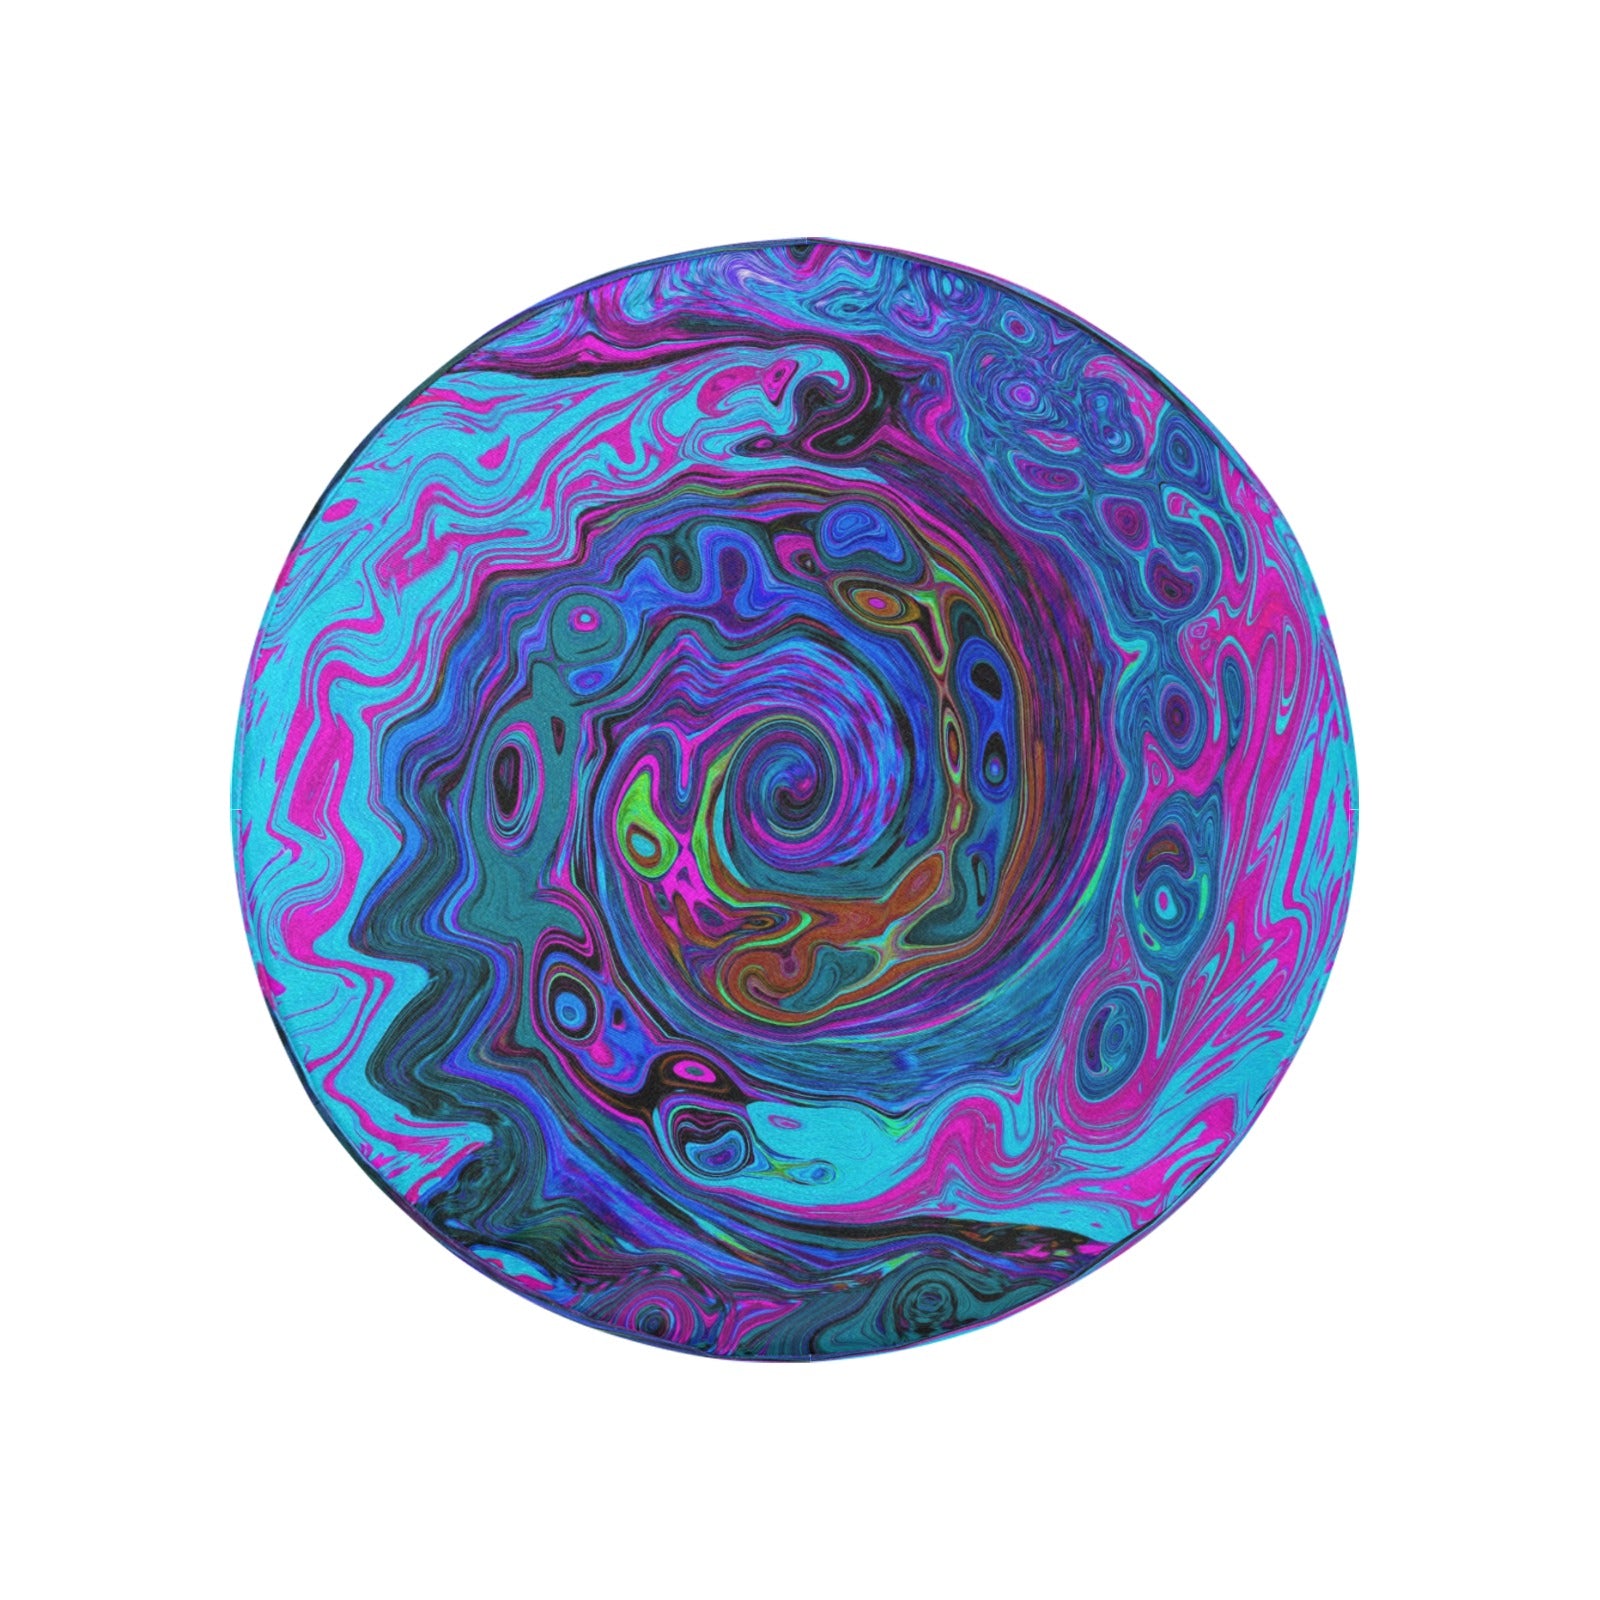 Spare Tire Covers, Groovy Abstract Retro Blue and Purple Swirl - Medium